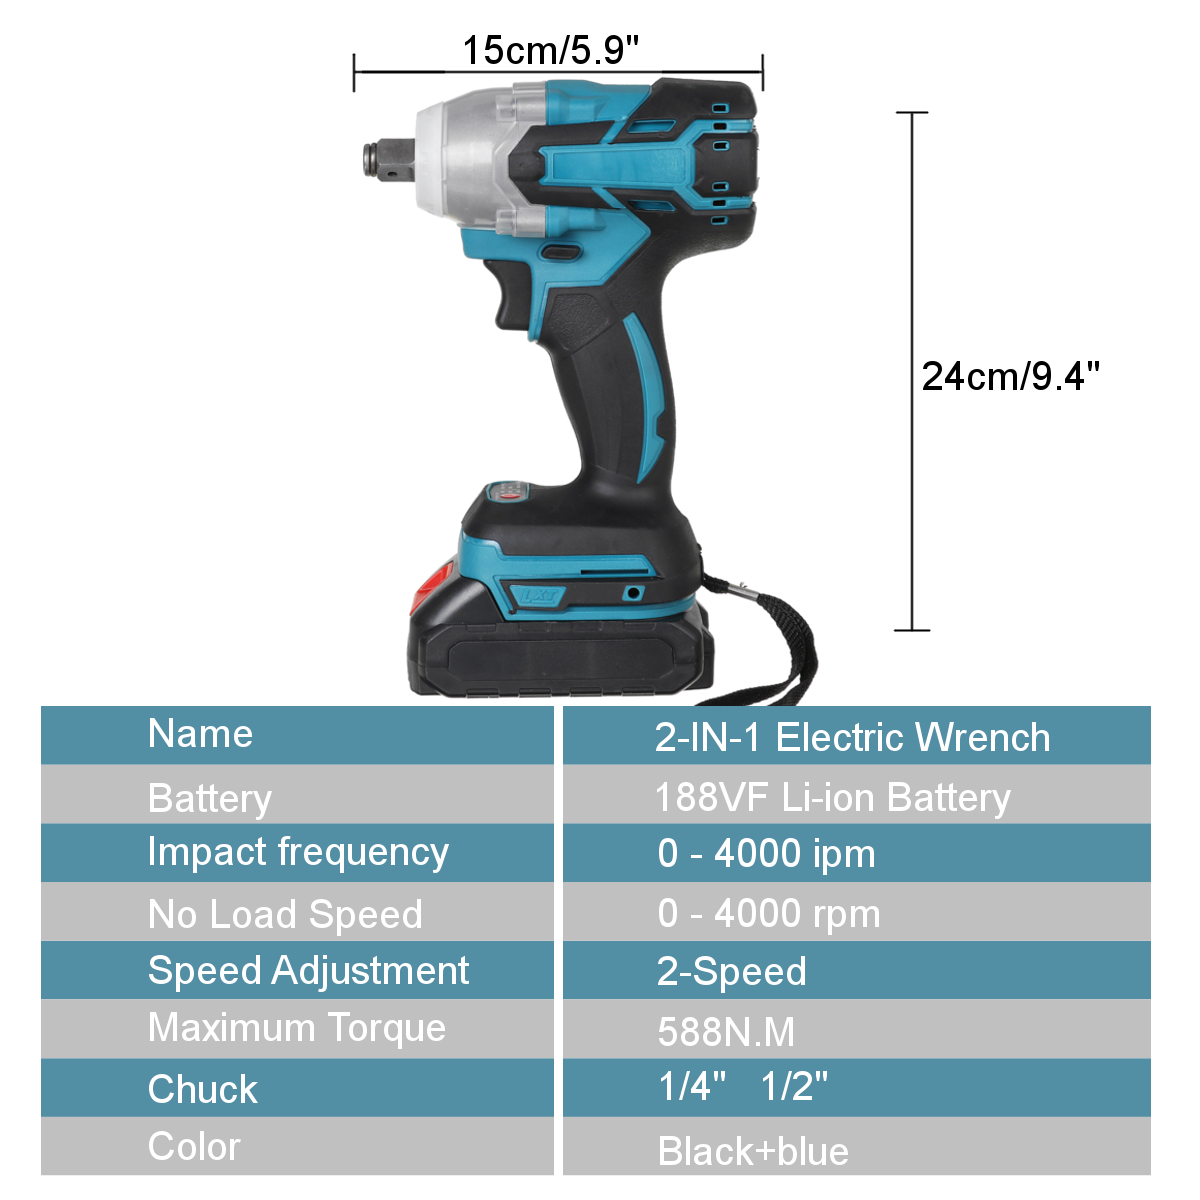 2-in-1-188VF-588Nm-Li-Ion-Brushless-Cordless-Electric-12quot-Wrench-14quotScrewdriver-Drill-W-12-Bat-1858198-13